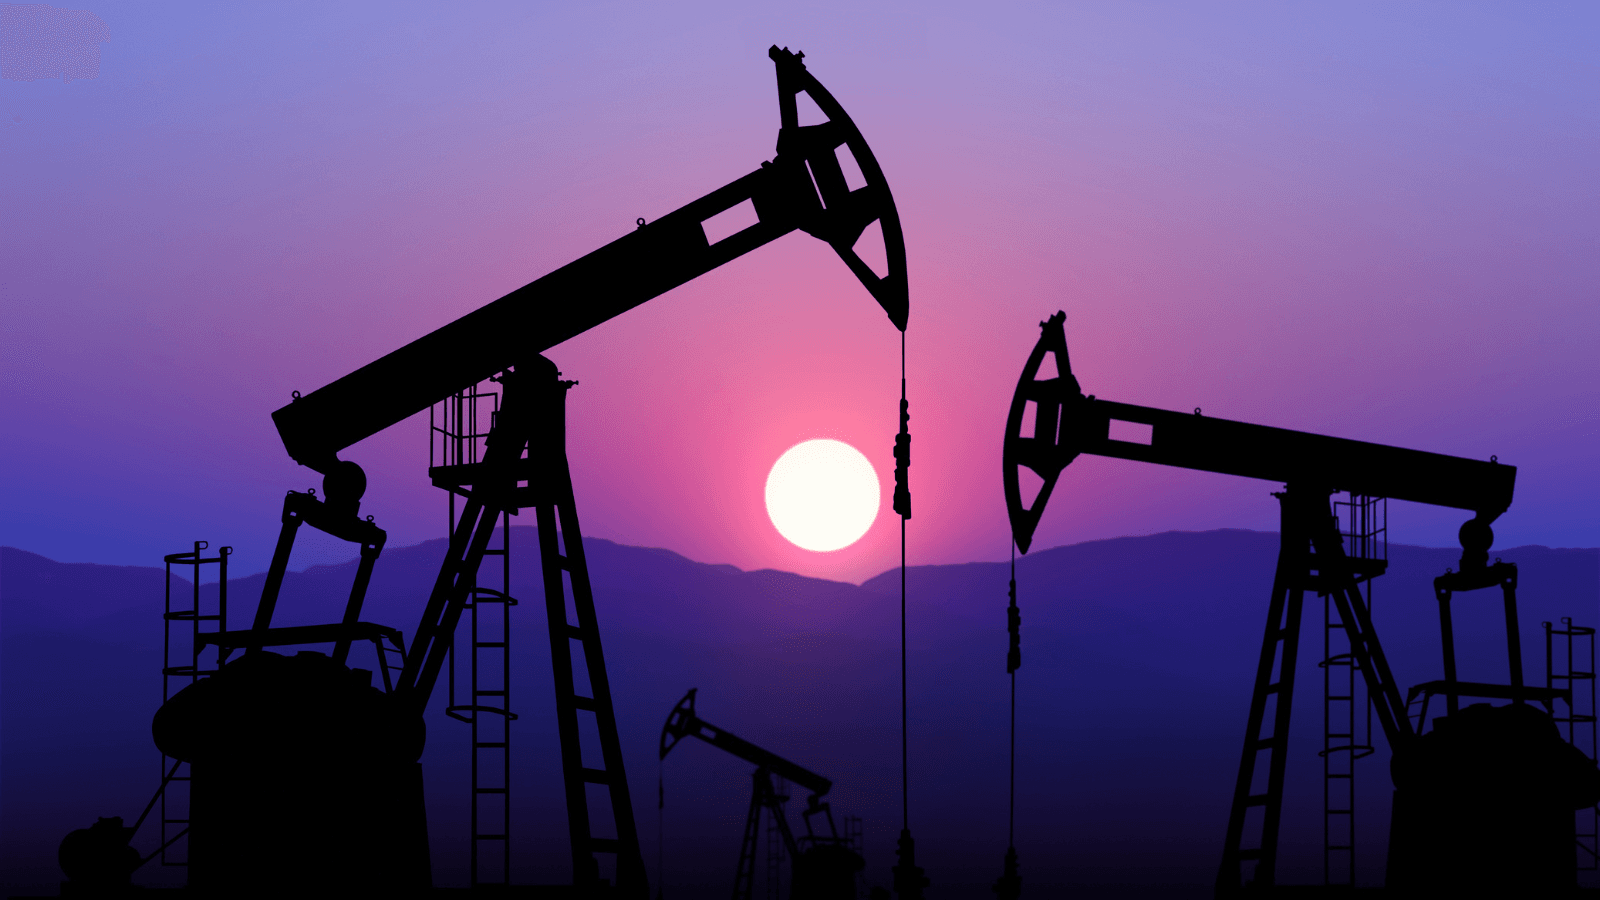 Oil wells in front of setting sun over mountains